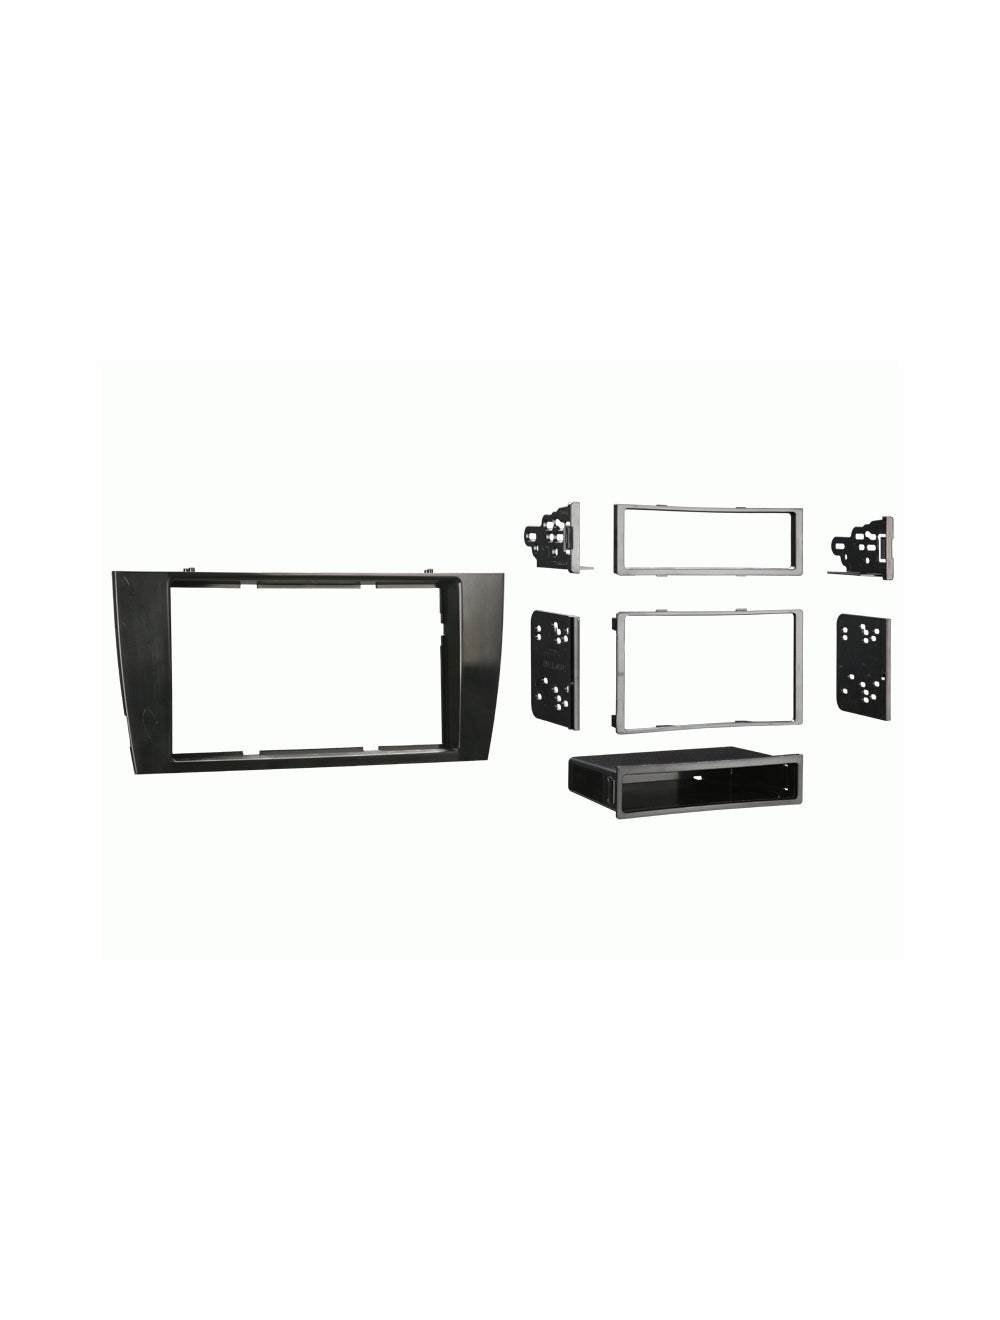 Metra 99-9501B Single or Double DIN Installation Dash Kit for Jaguar X-Type and S-Type Vehicles